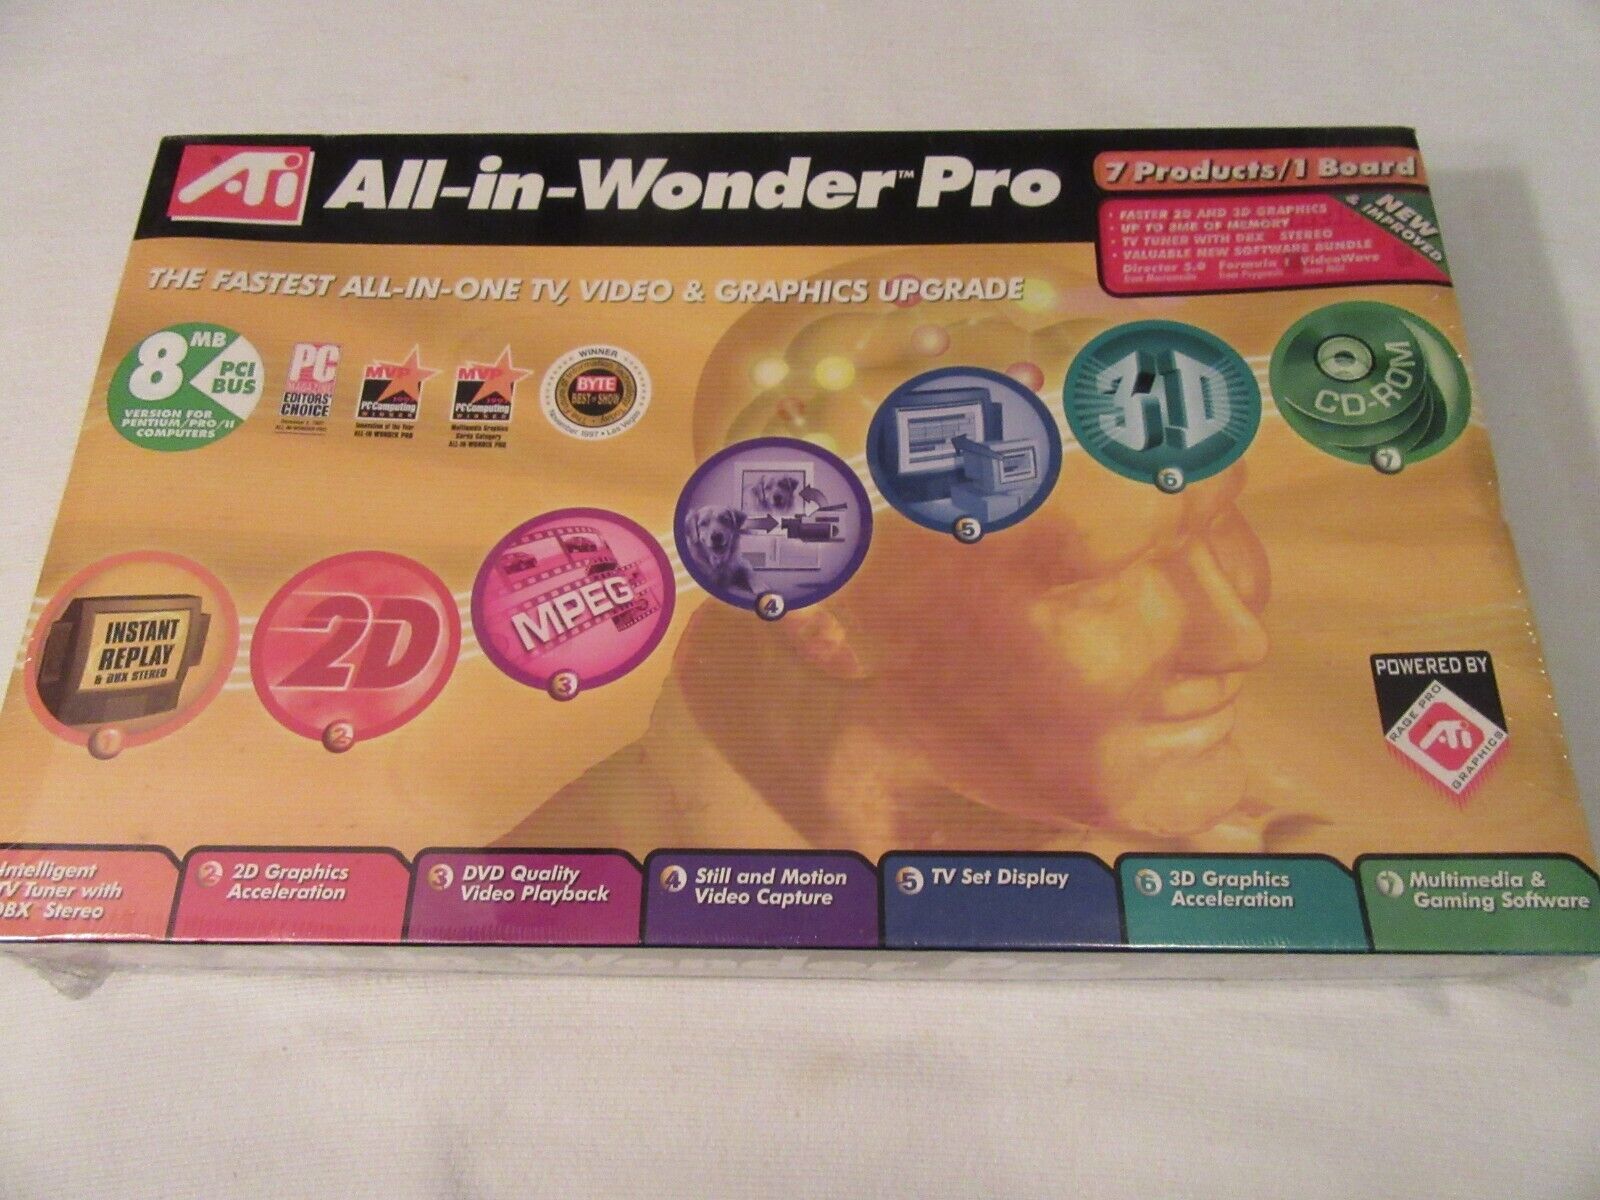 ATI All-in-Wonder Pro 8mb PCI Bus, TV Video Graphics Upgrade, New, Sealed in Box